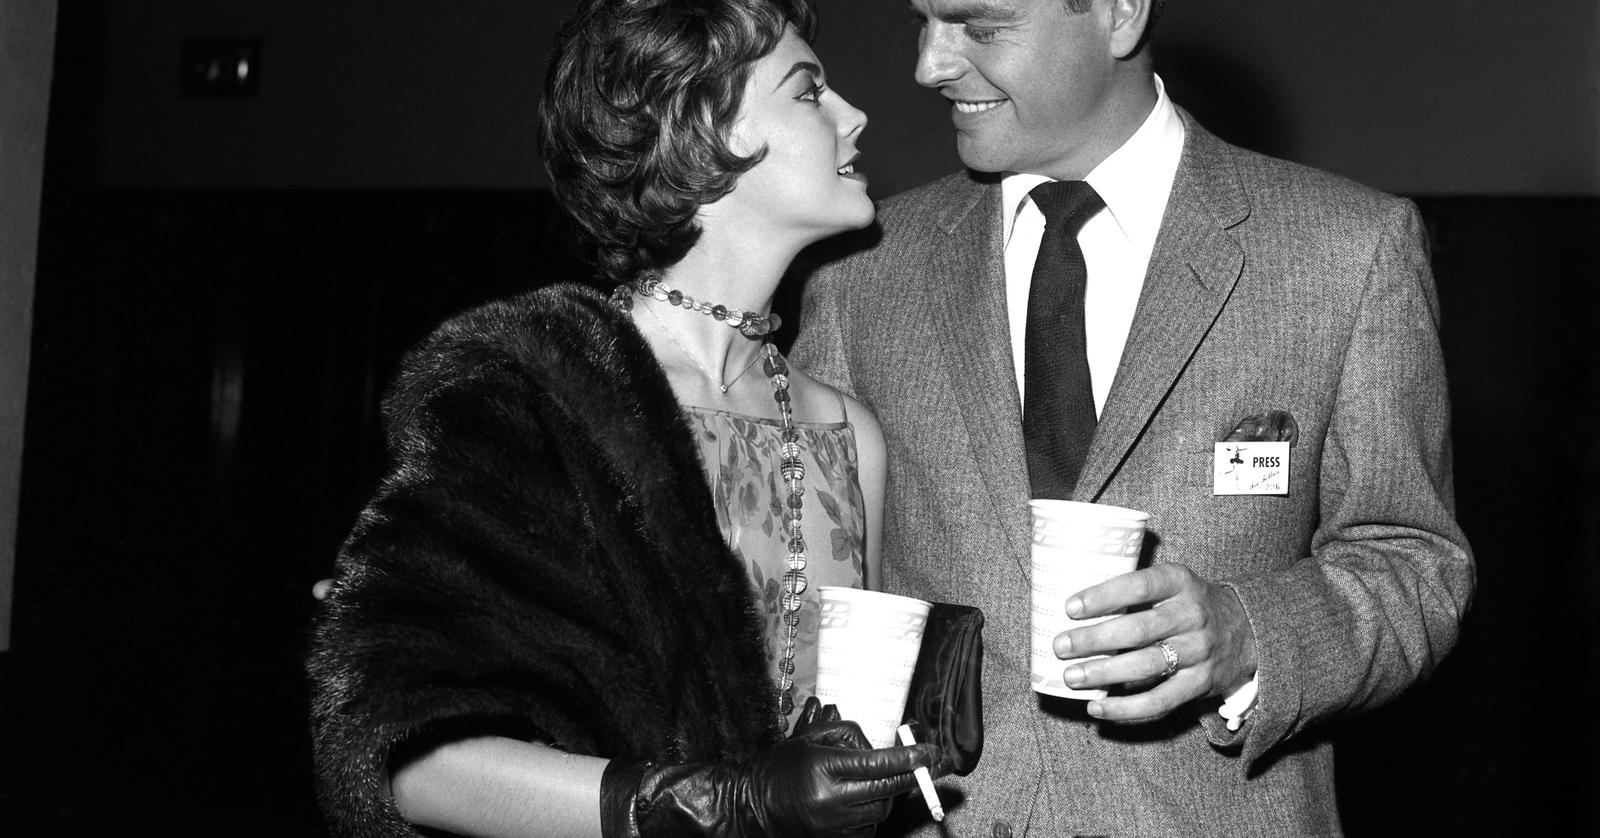 How Many Husbands Did Late Actress Natalie Wood Have?